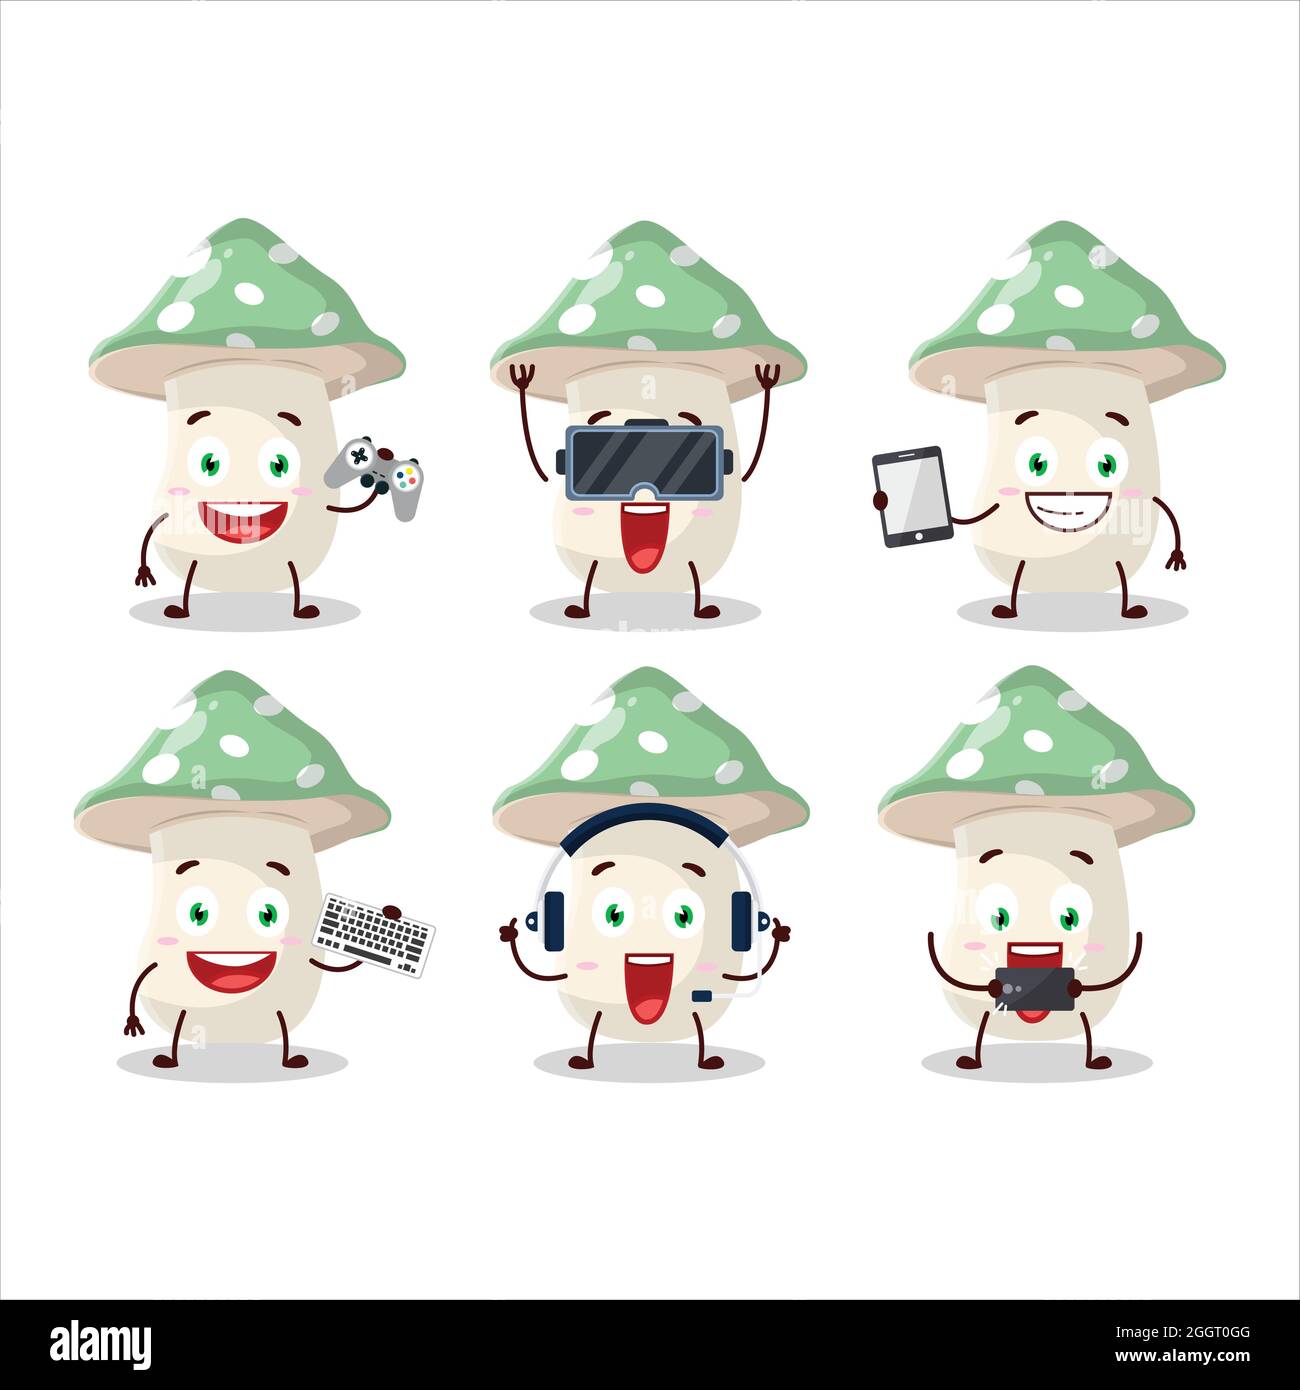 Green amanita cartoon character are playing games with various cute emoticons. Vector illustration Stock Vector